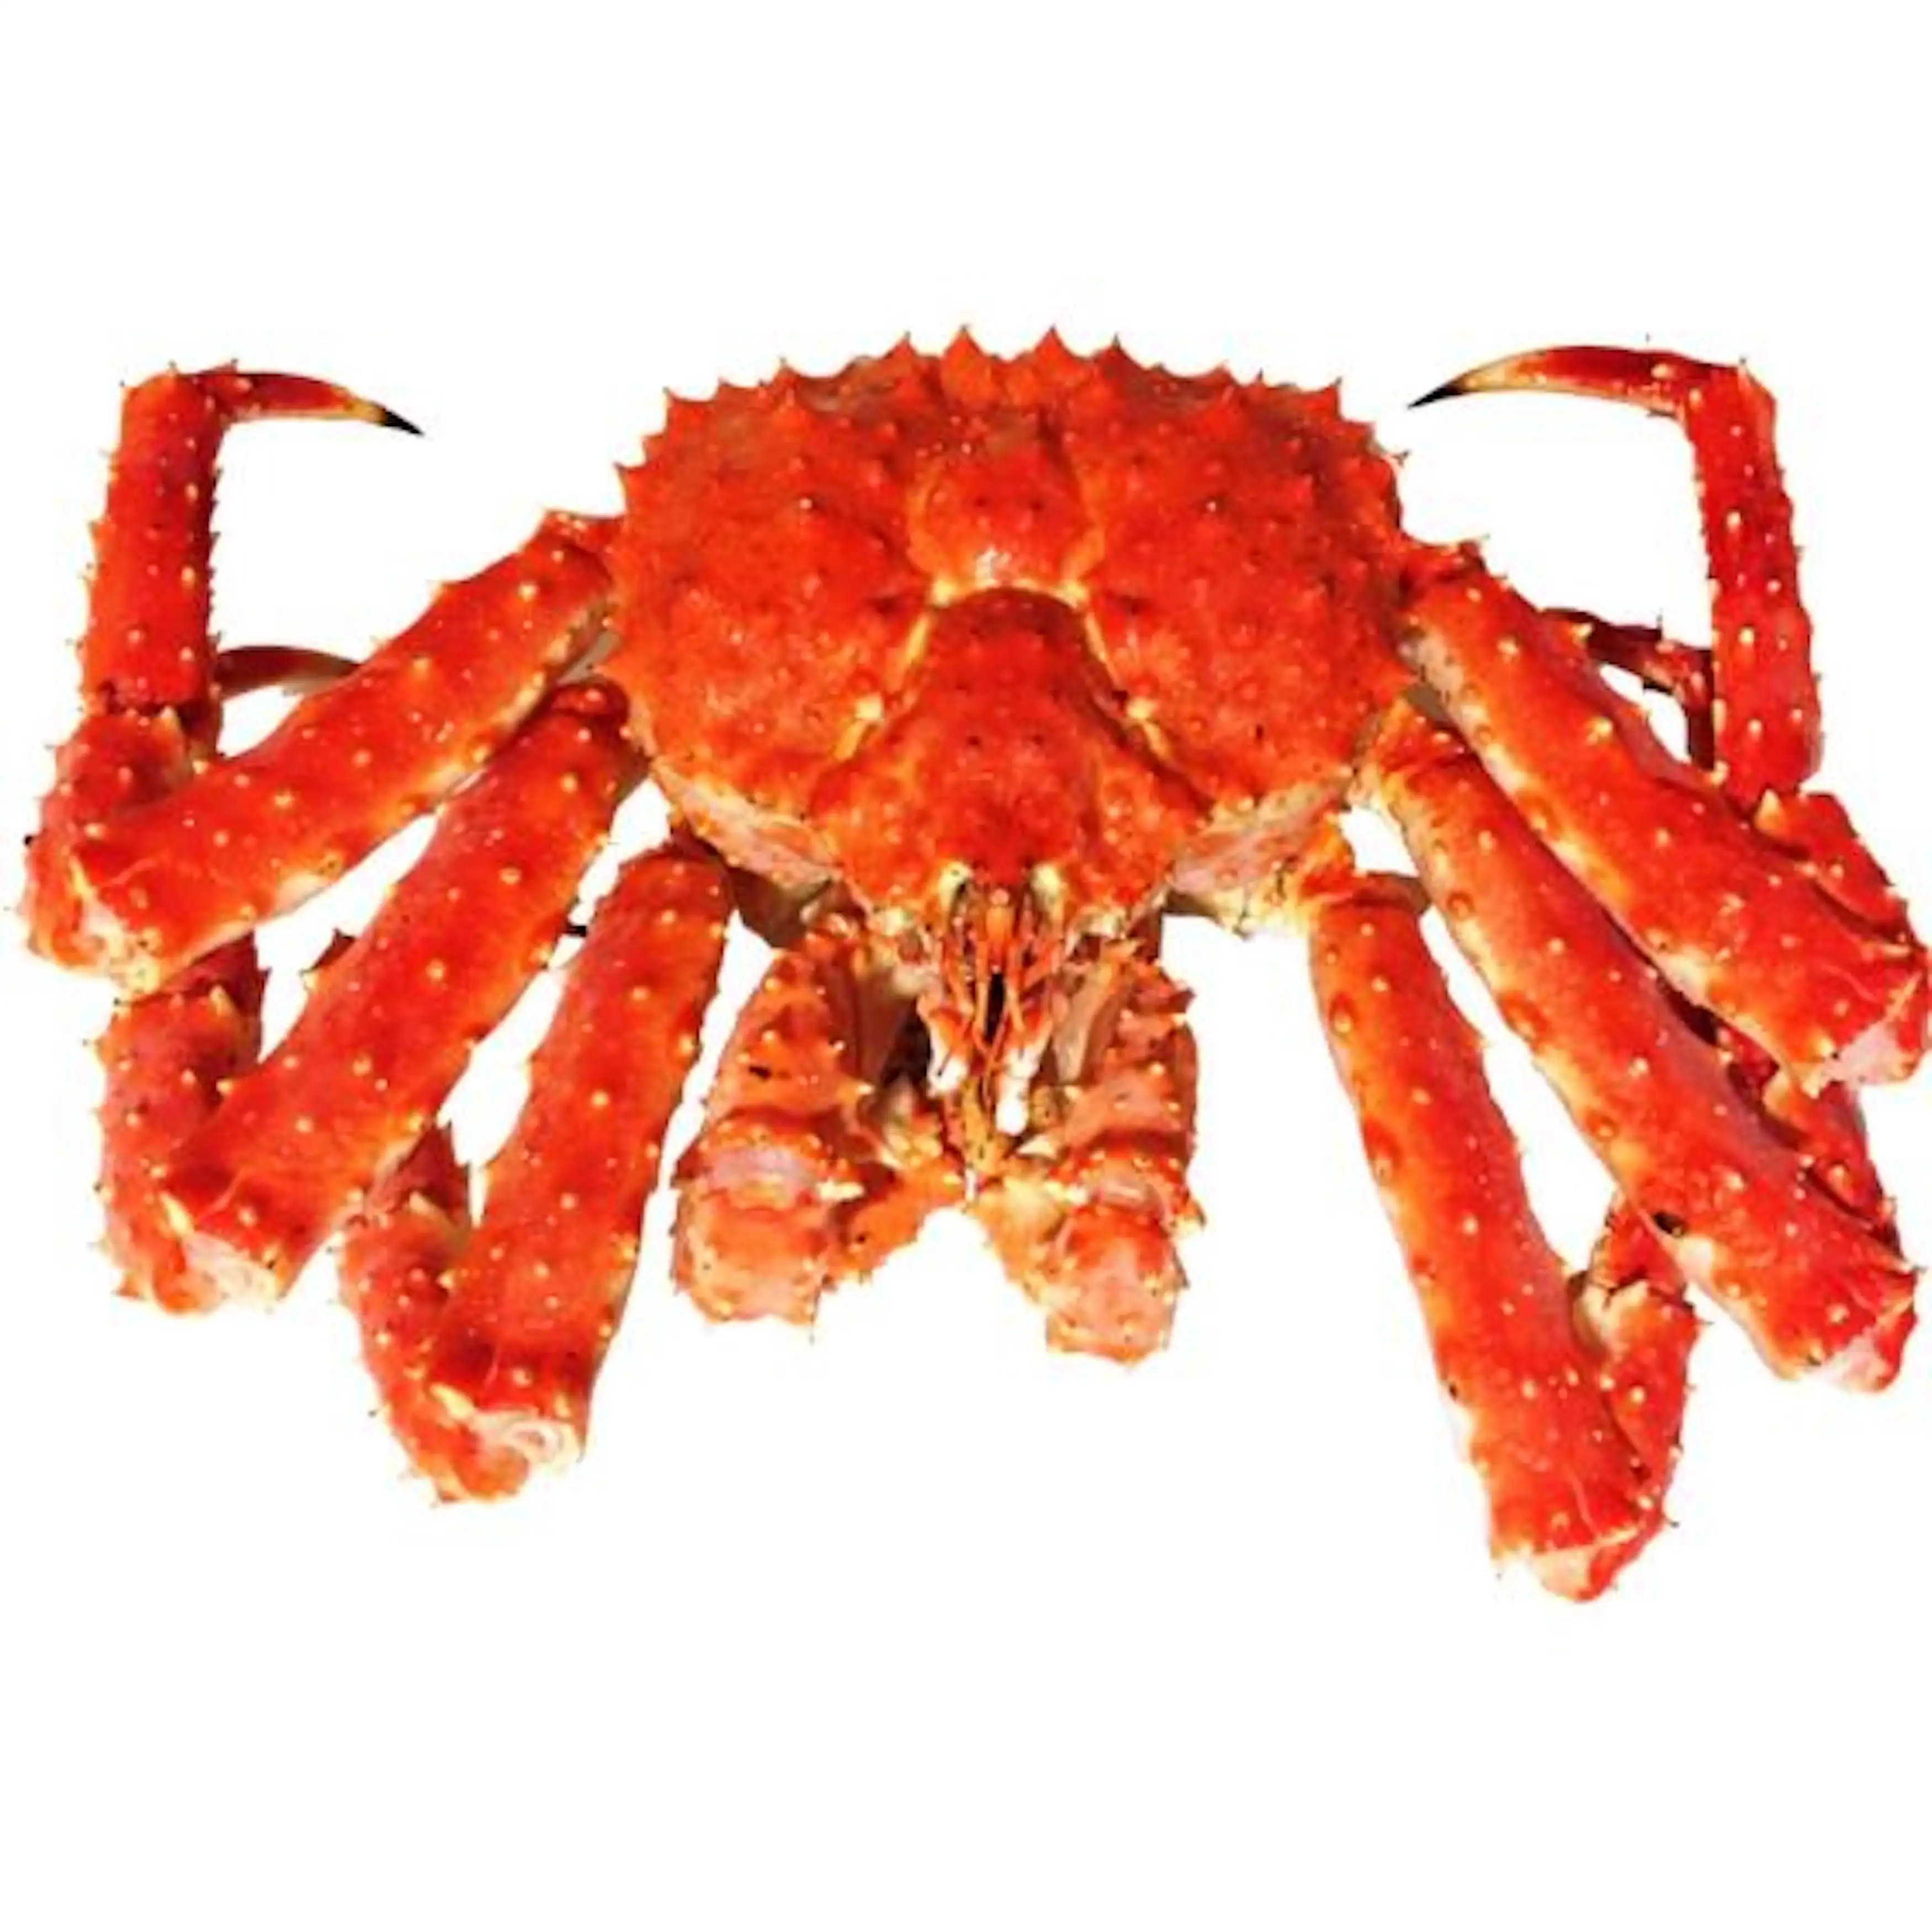 Hot Sale Best Quality Frozen / Fresh Cleaned Whole Red King Crab For sale.